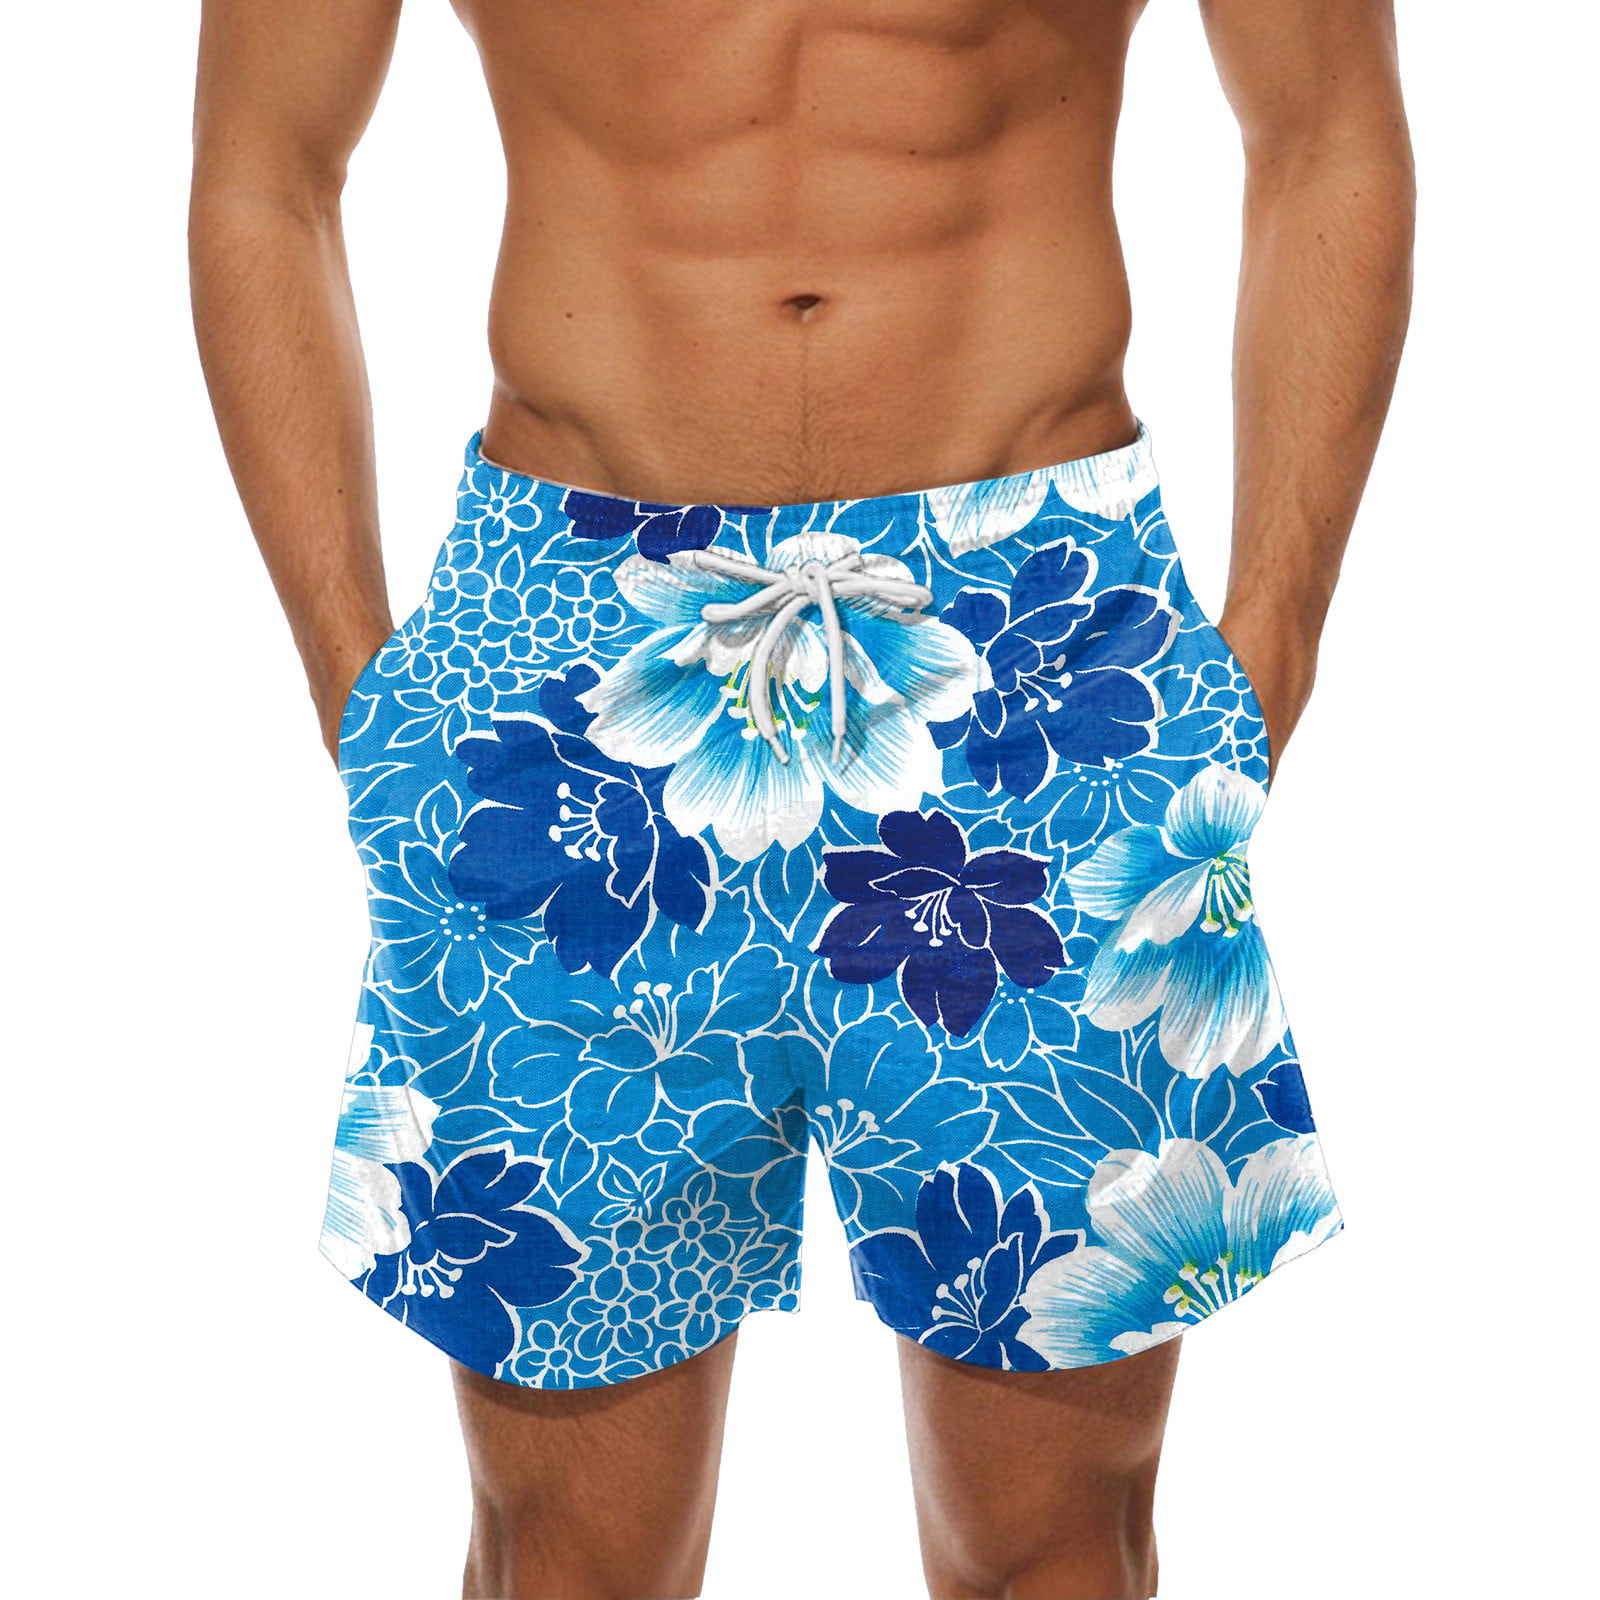 Casual Womens Swim Trunks Breathable Quick Dry Printed Beach Shorts More Summer Boardshorts with Mesh Lining